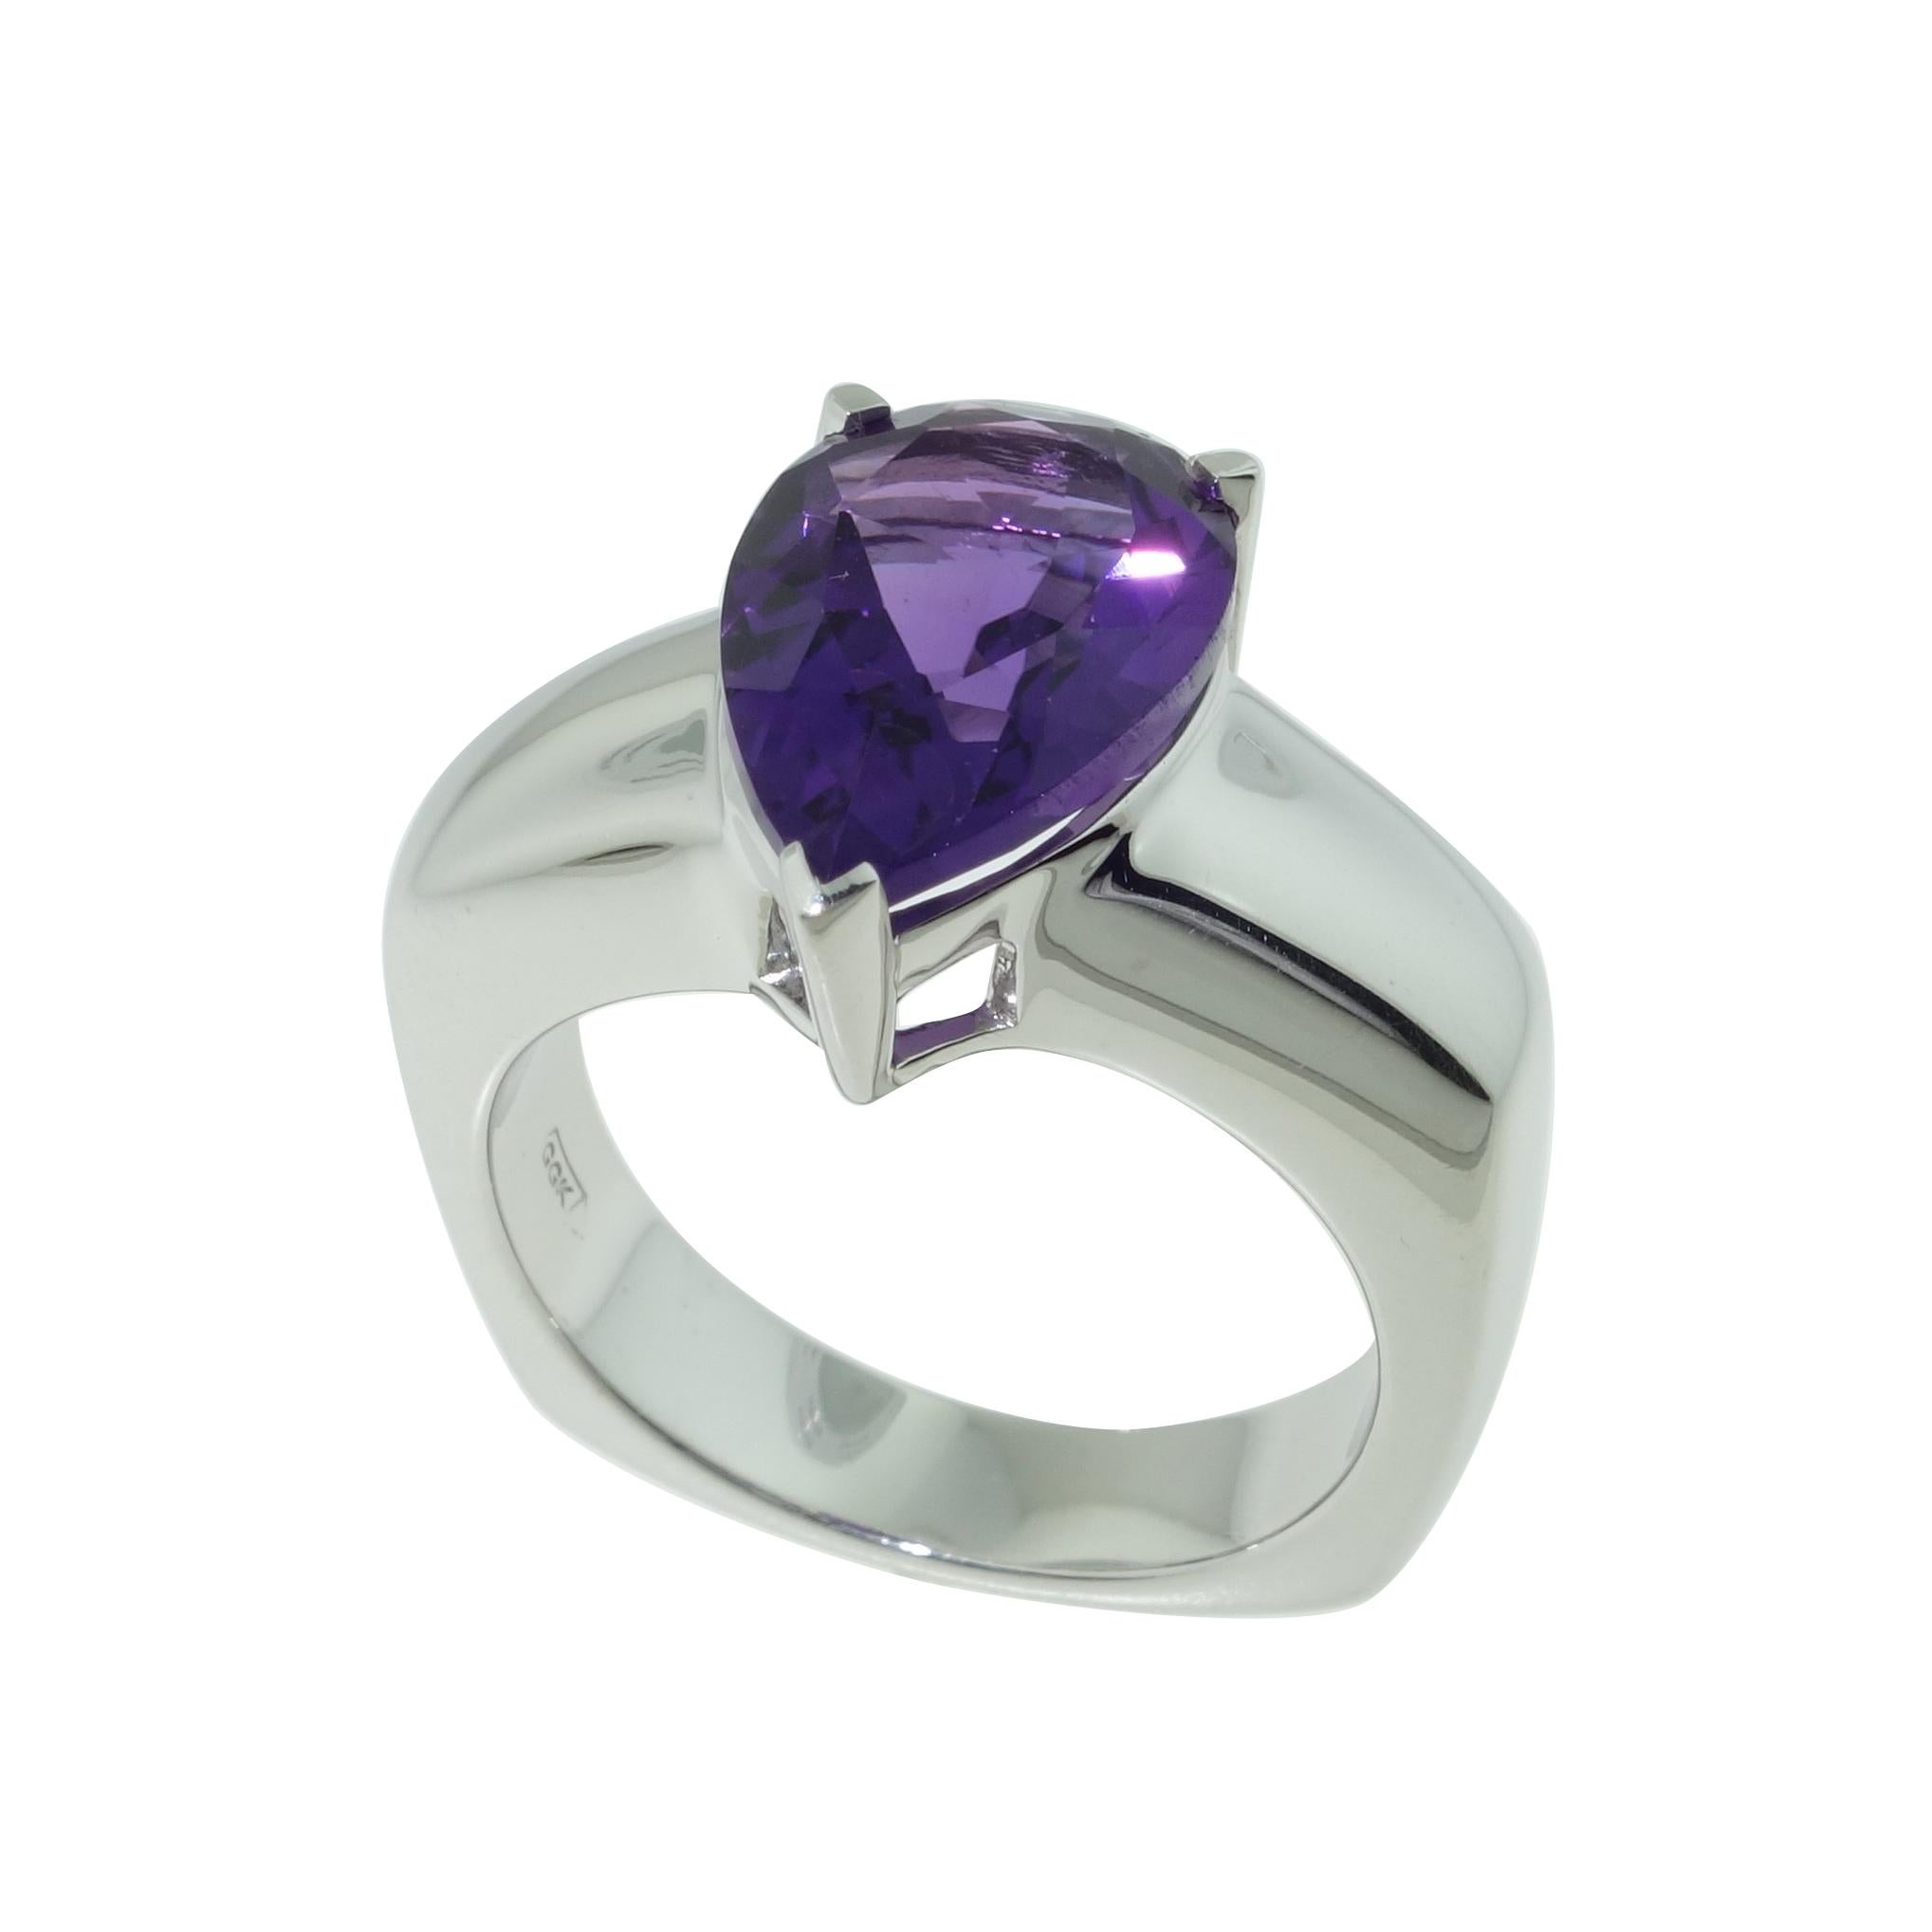 Stunning 3.95 Carat Teardrop Amethyst Solitaire Ring For Sale